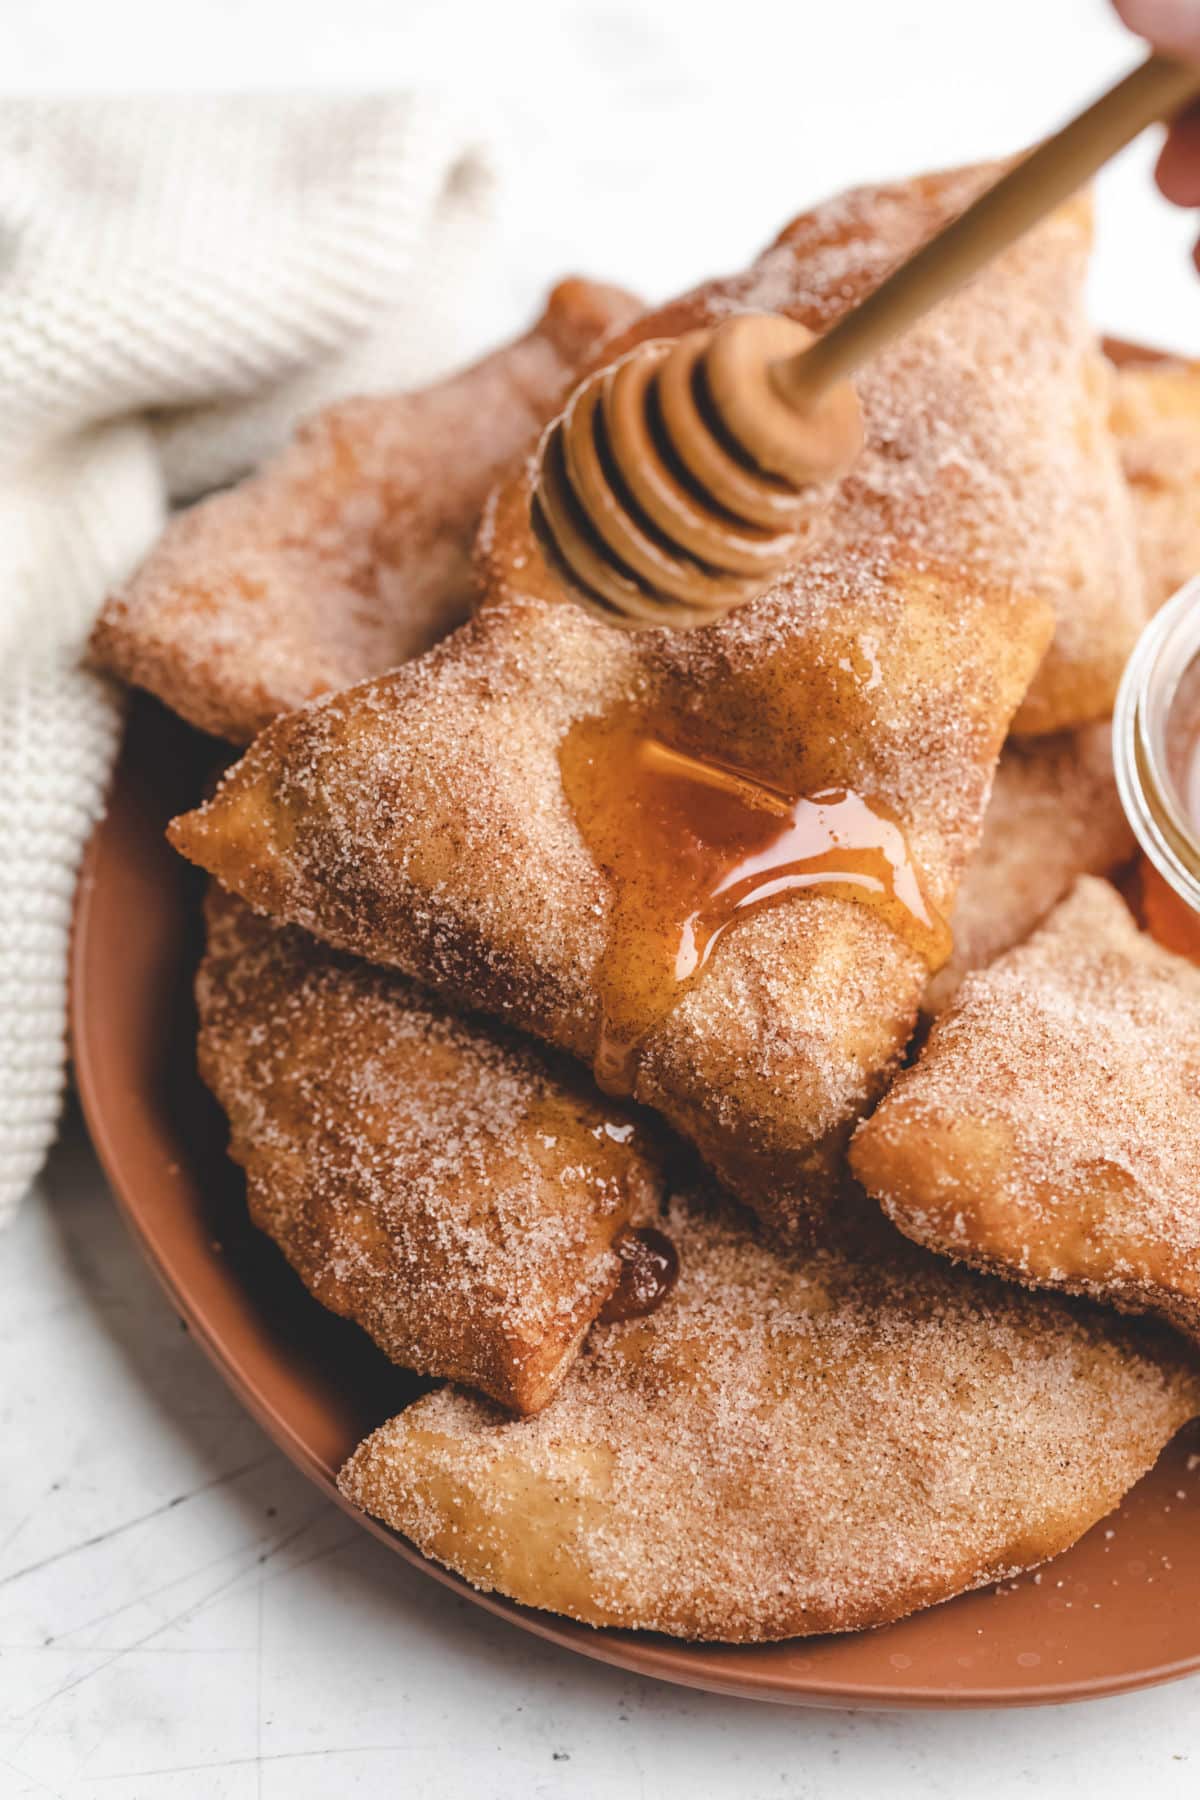 Sopaipillas on a plate with honey.